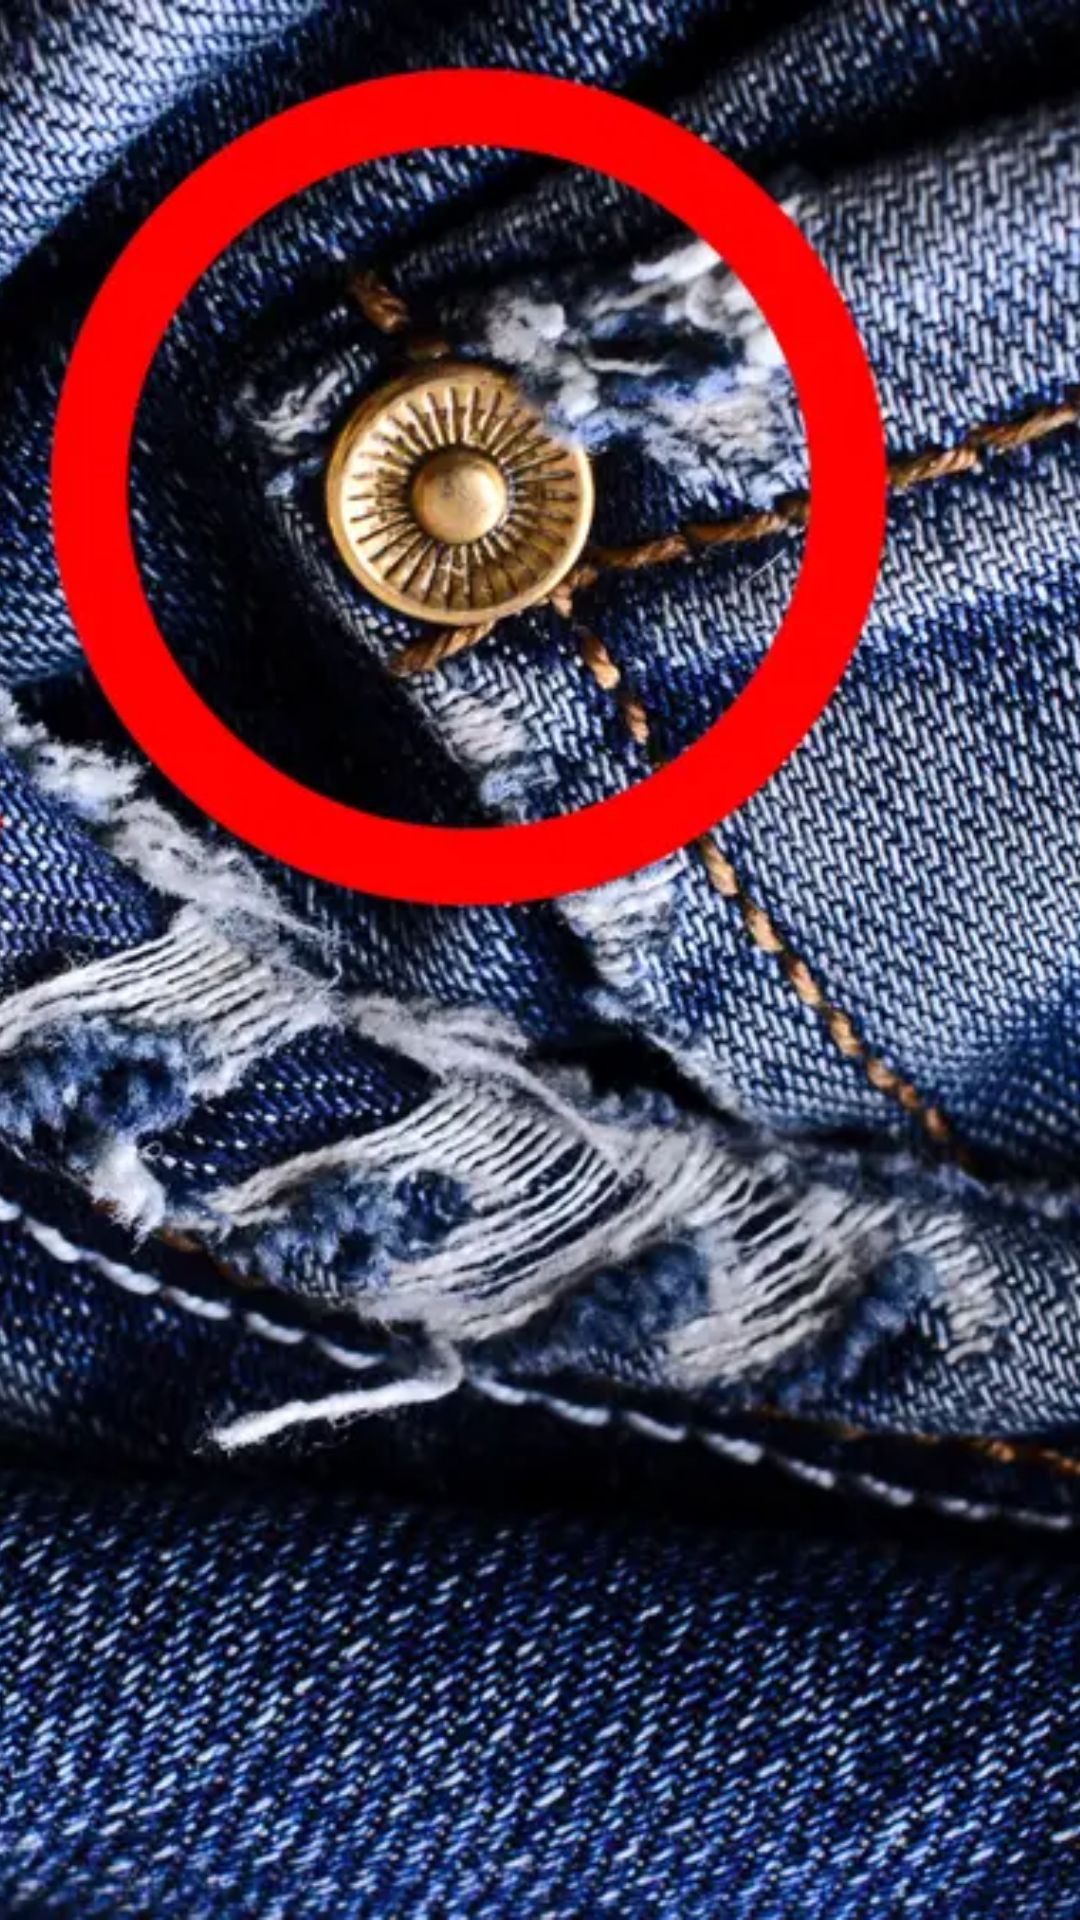 This is the original function of the small button in the pocket of the jeans. 